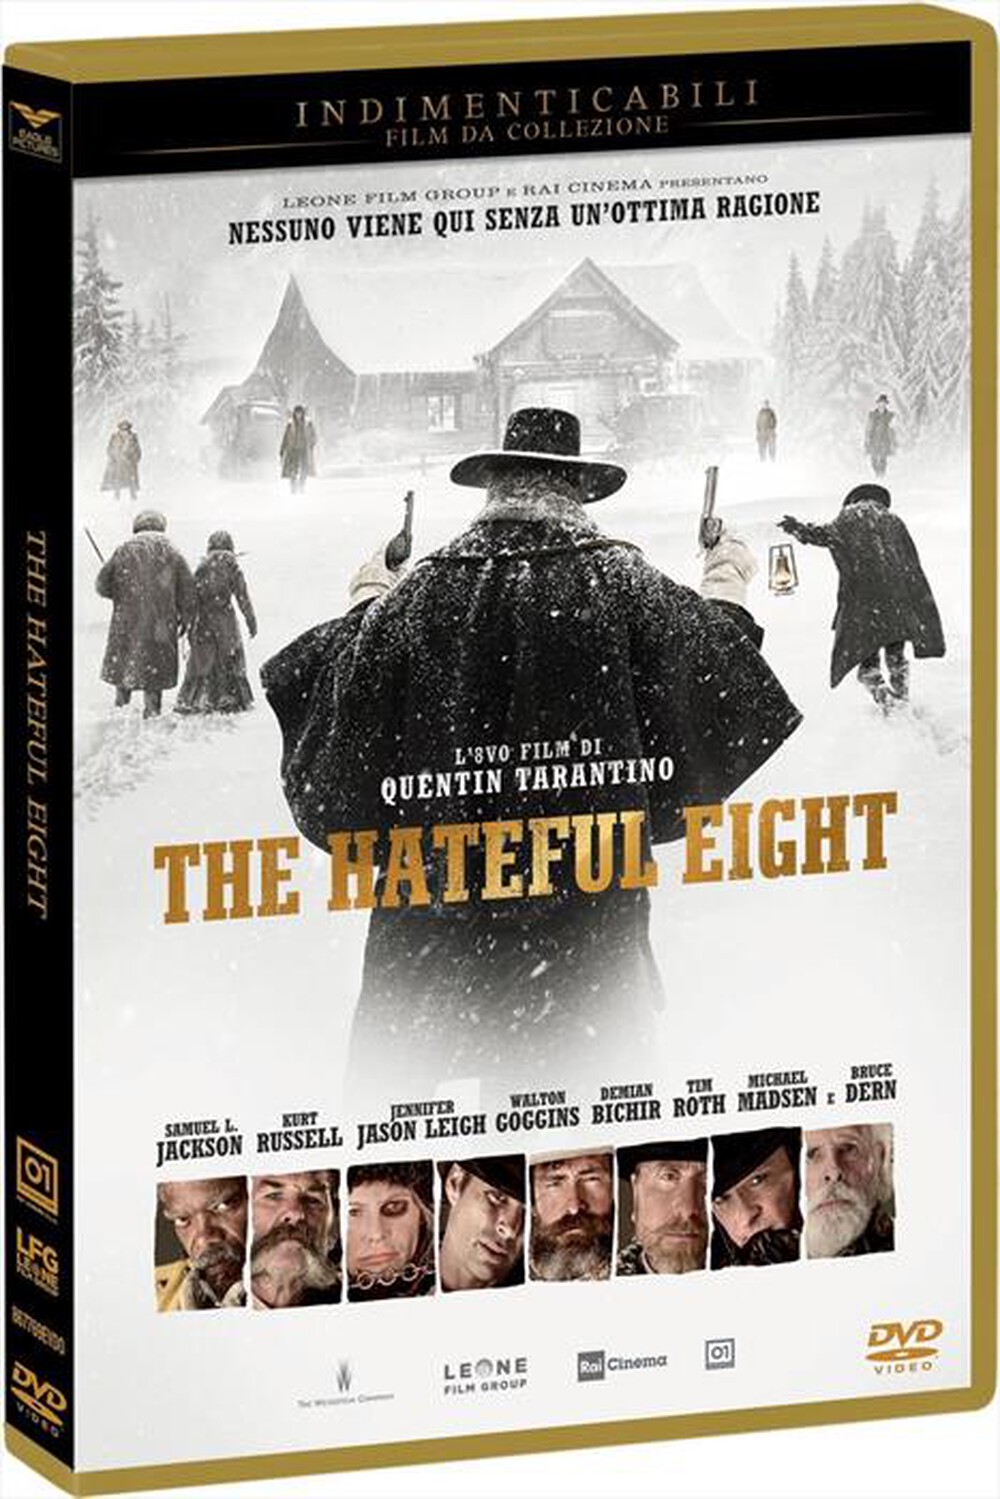 "01 DISTRIBUTION - Hateful Eight (The)"